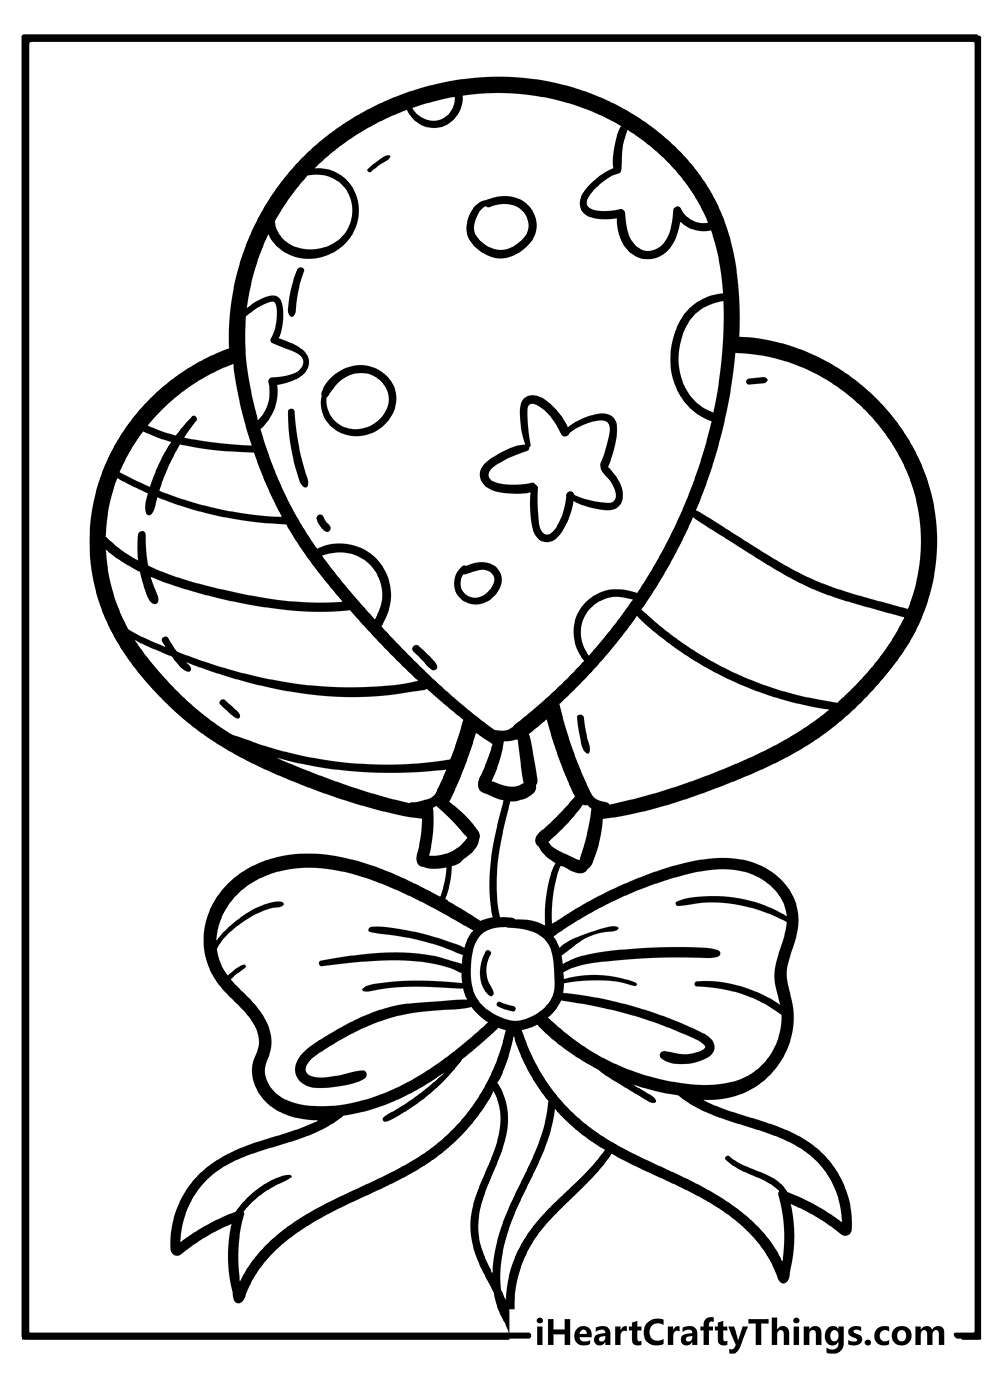 Balloons Coloring Sheet for children free download